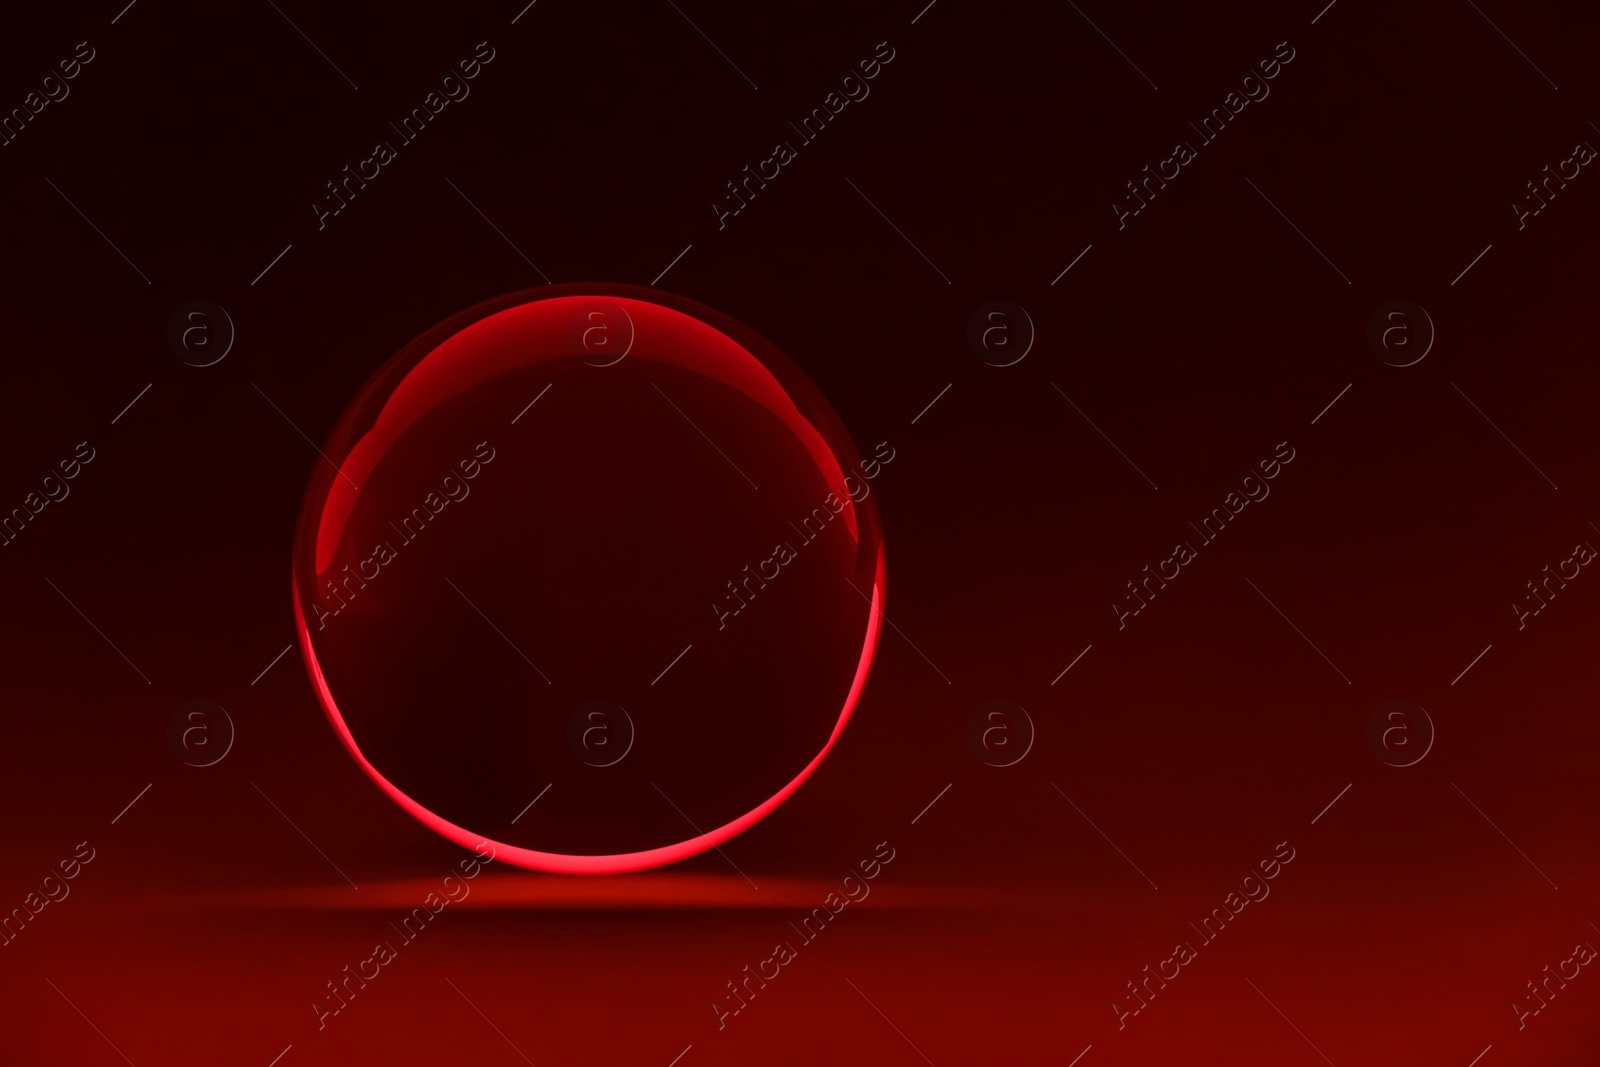 Photo of Transparent glass ball on dark red background. Space for text